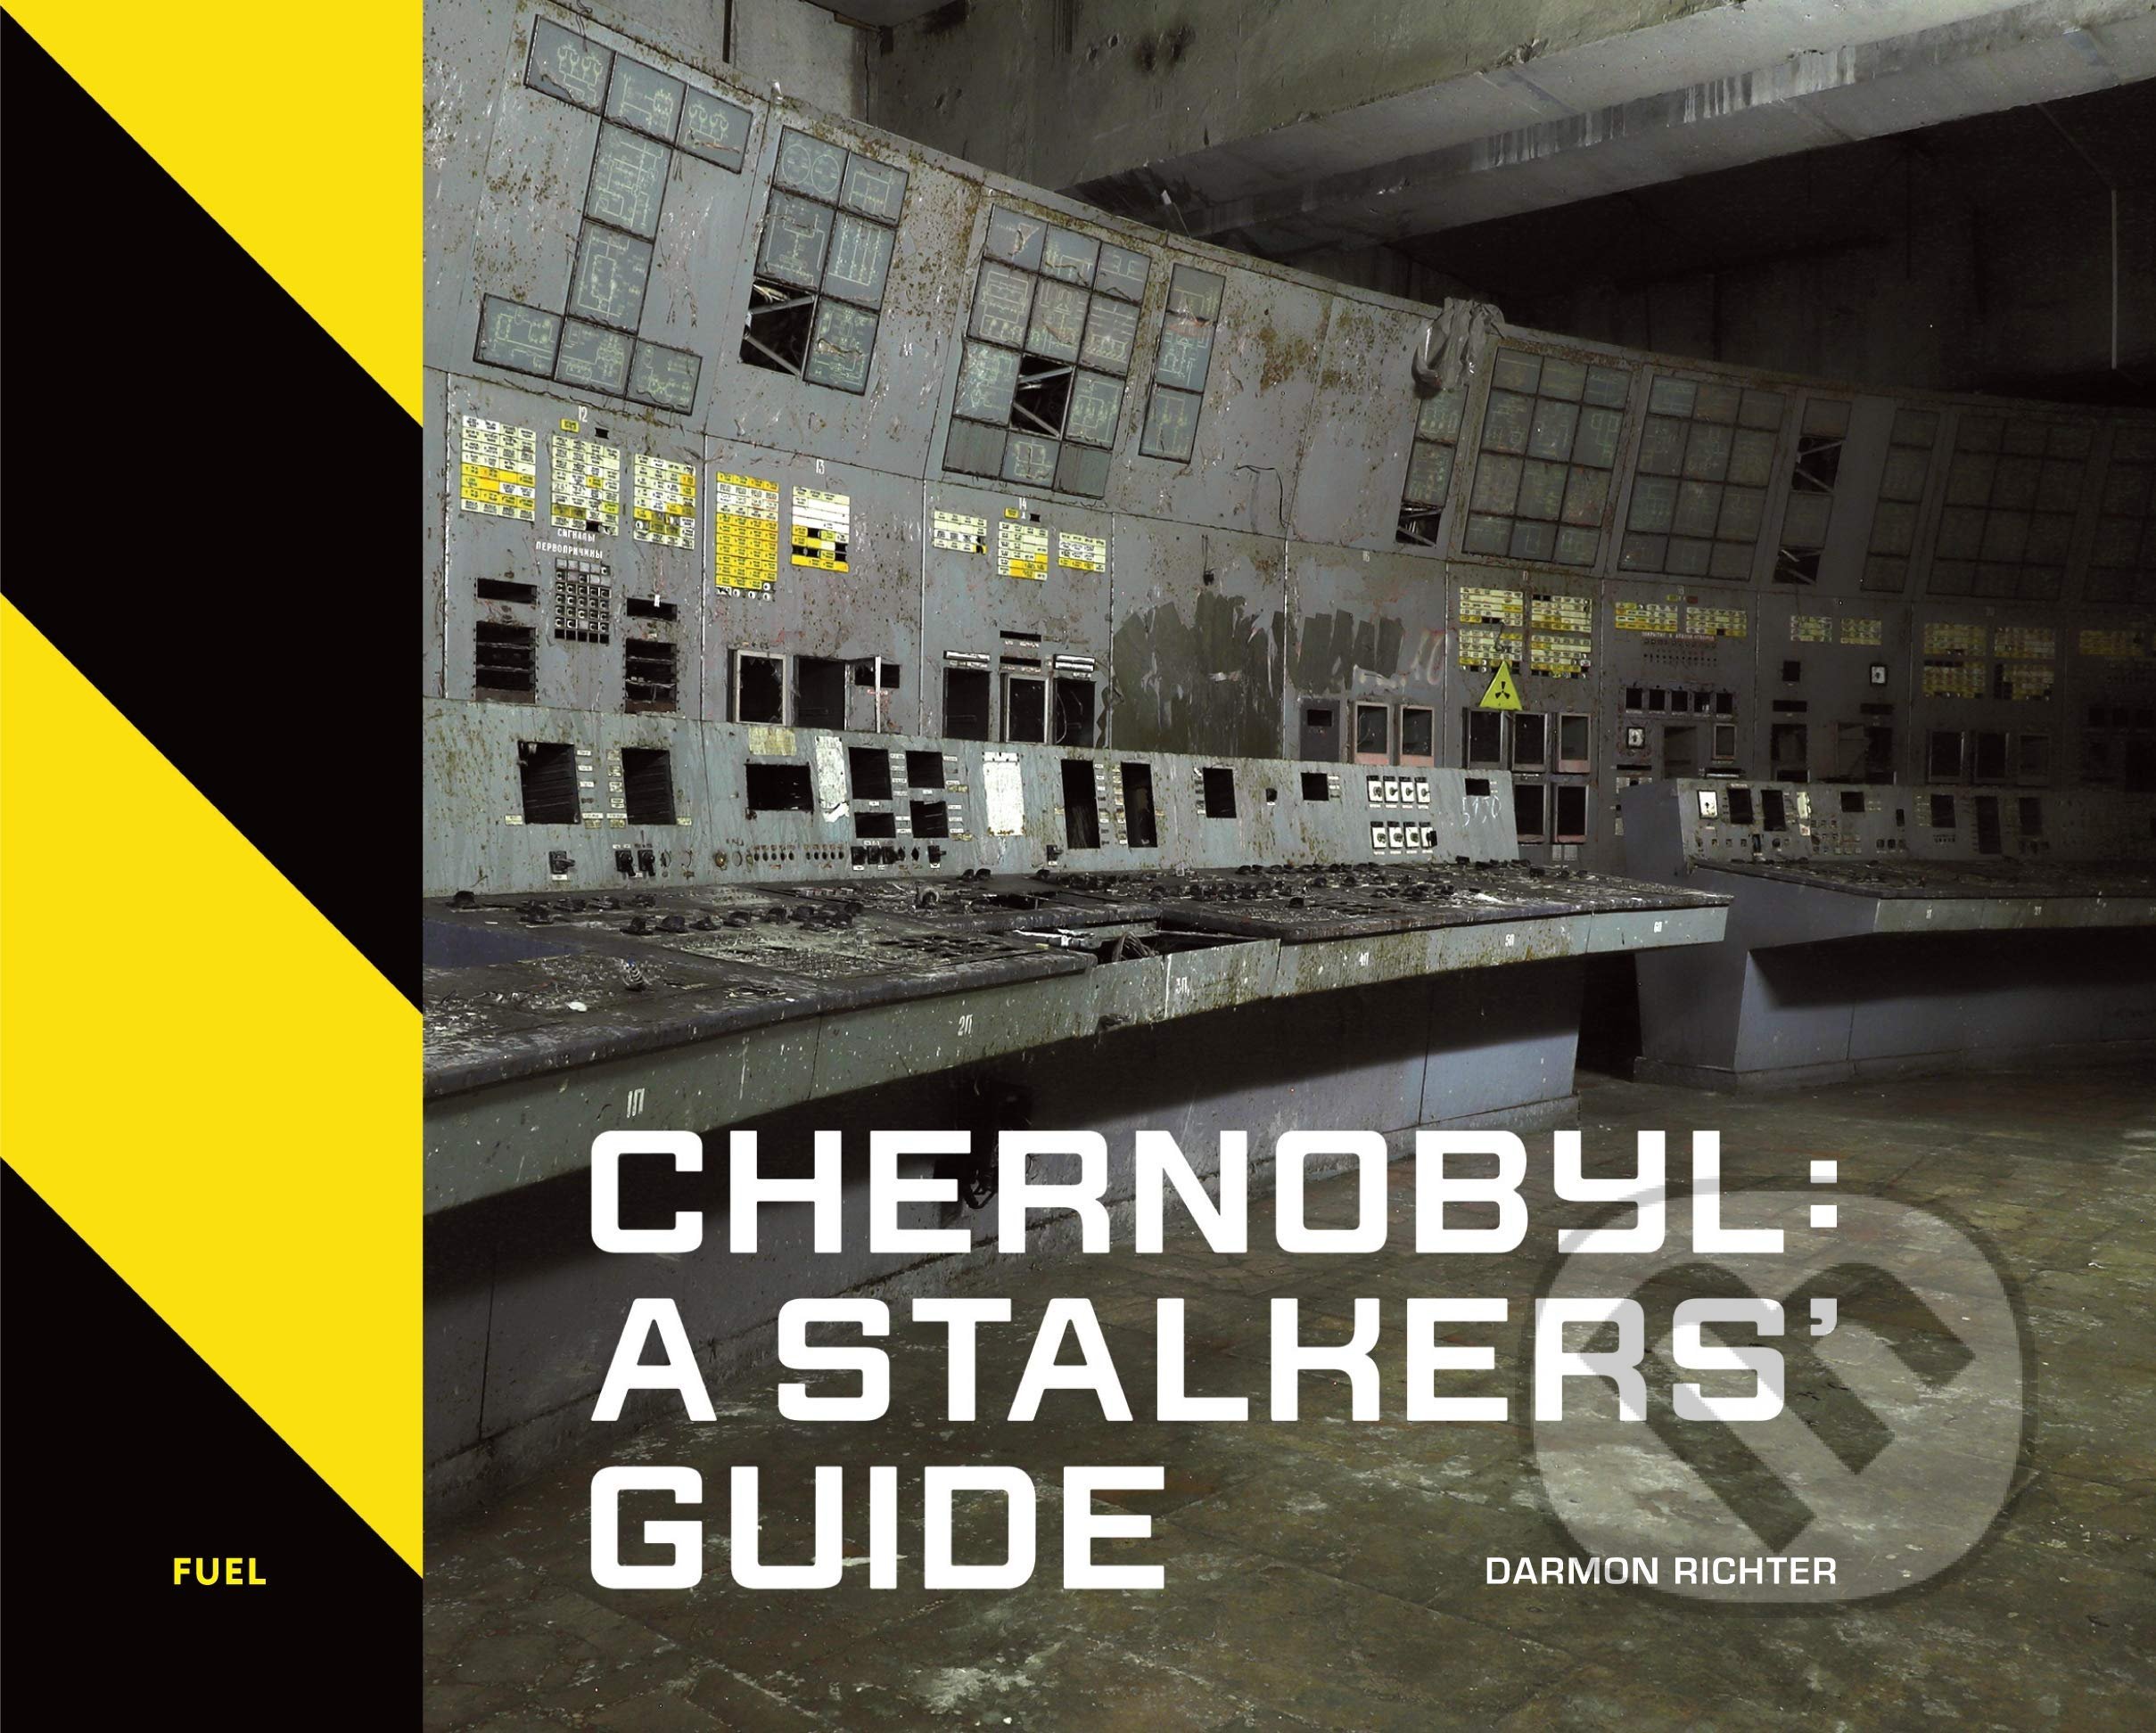 Chernobyl: A Stalkers&#039; Guide - Darmon Richter, Fuel, 2020